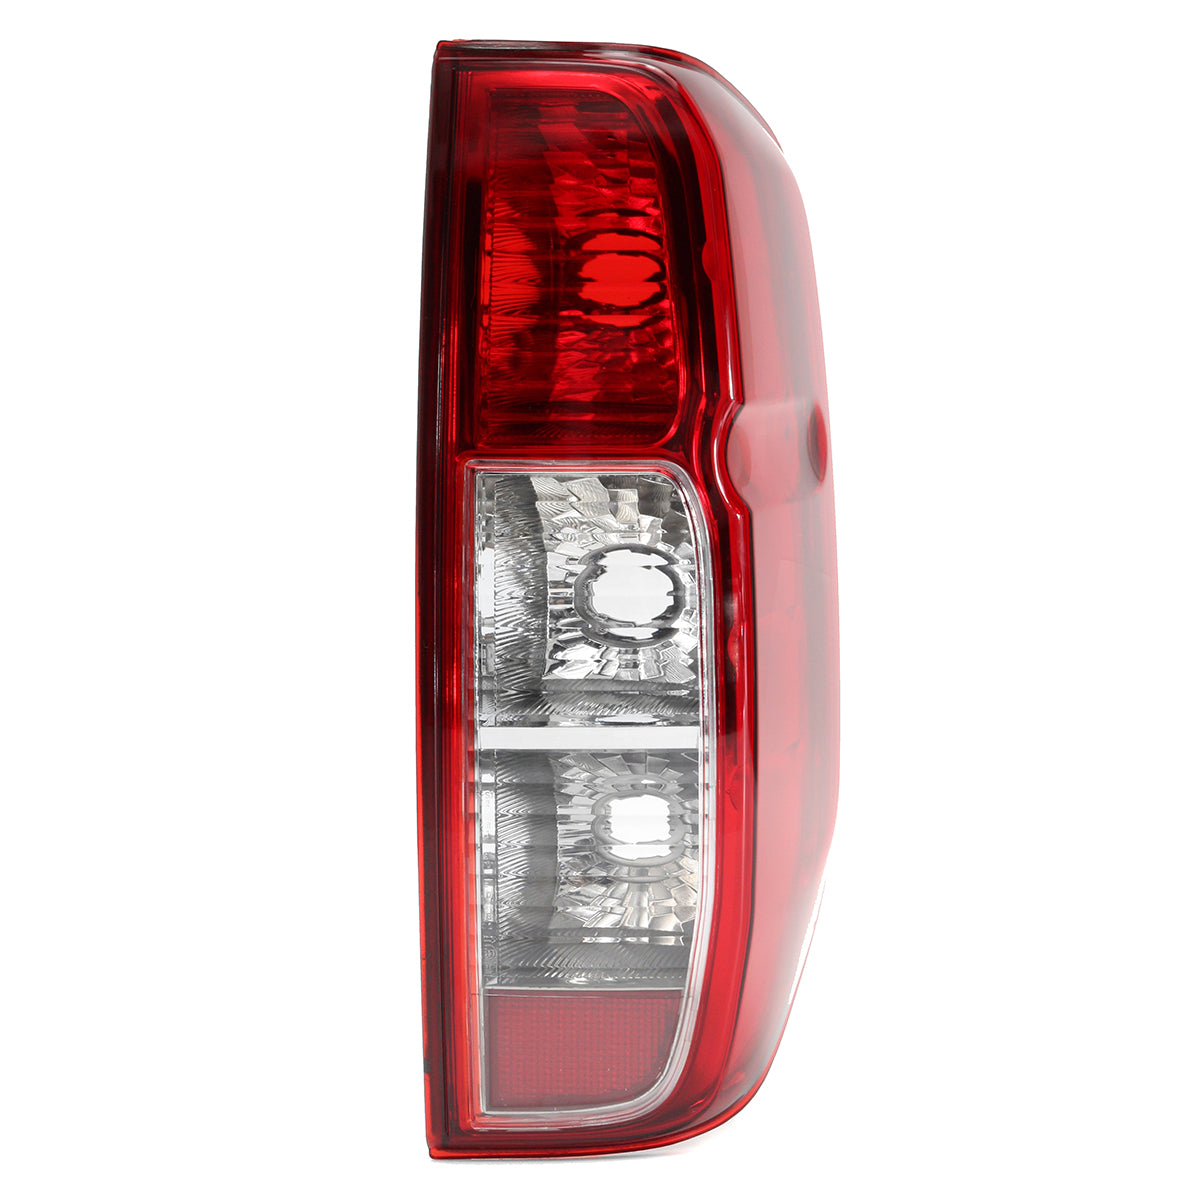 Firebrick Car Rear Tail Brake Light Red without Bulb For NISSAN NAVARA D40 2005-2010